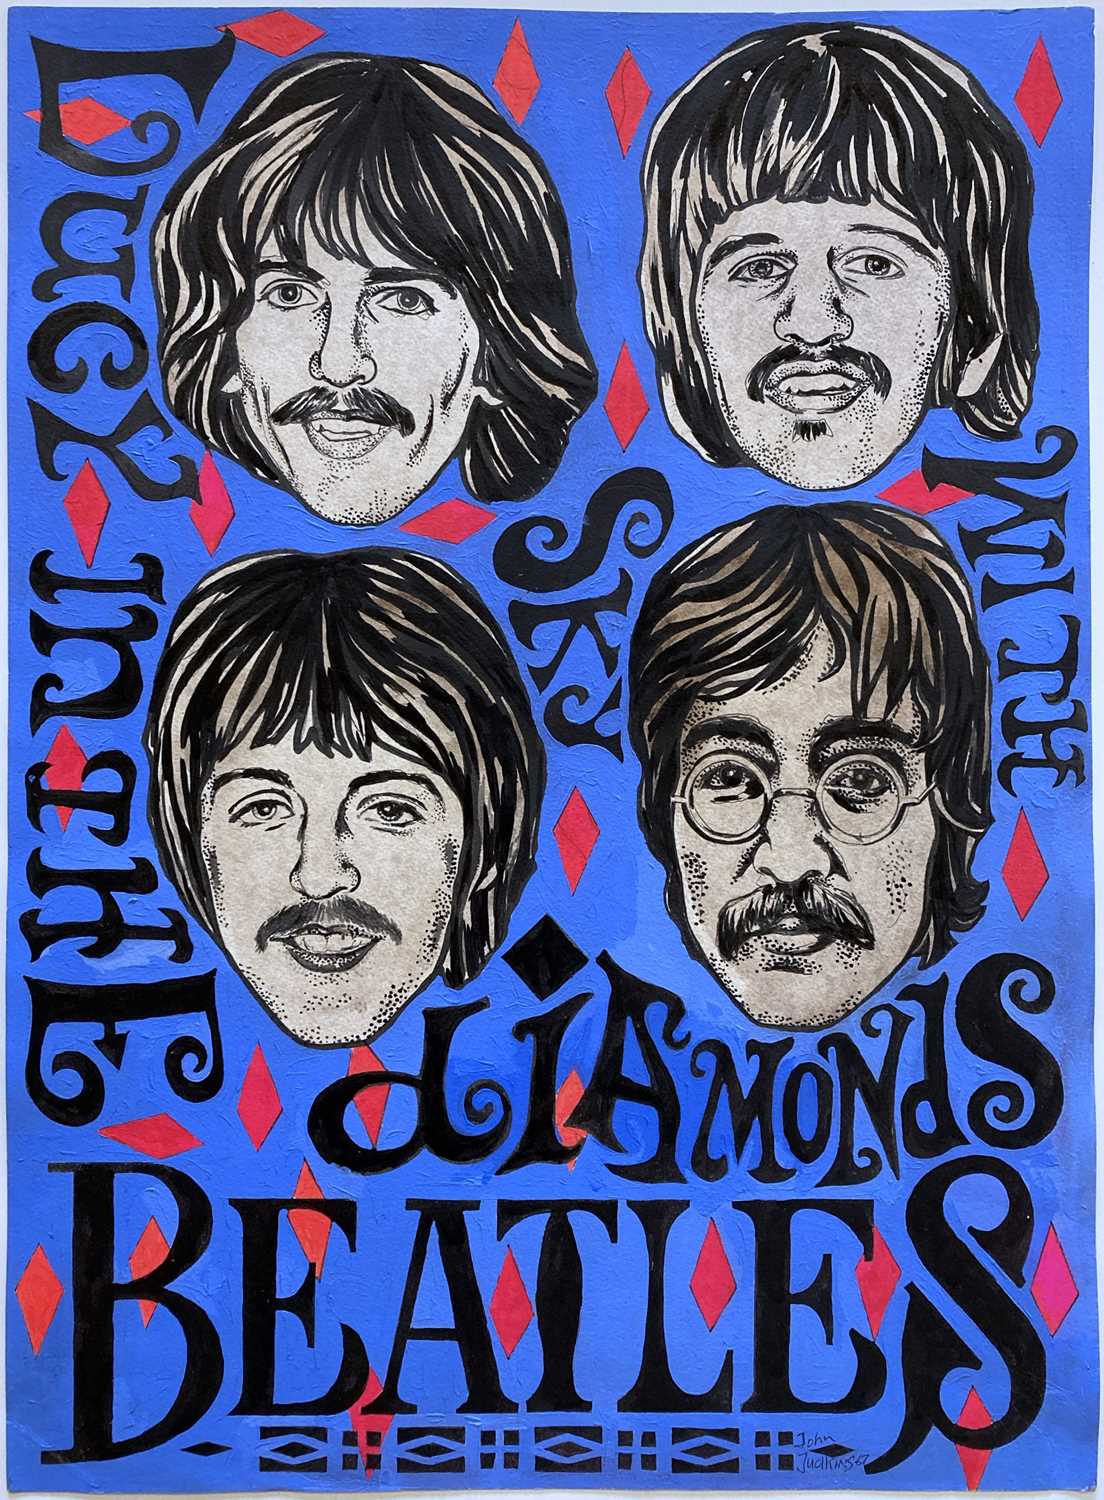 Lot 452 - THE BEATLES HAND-PAINTED POSTER.